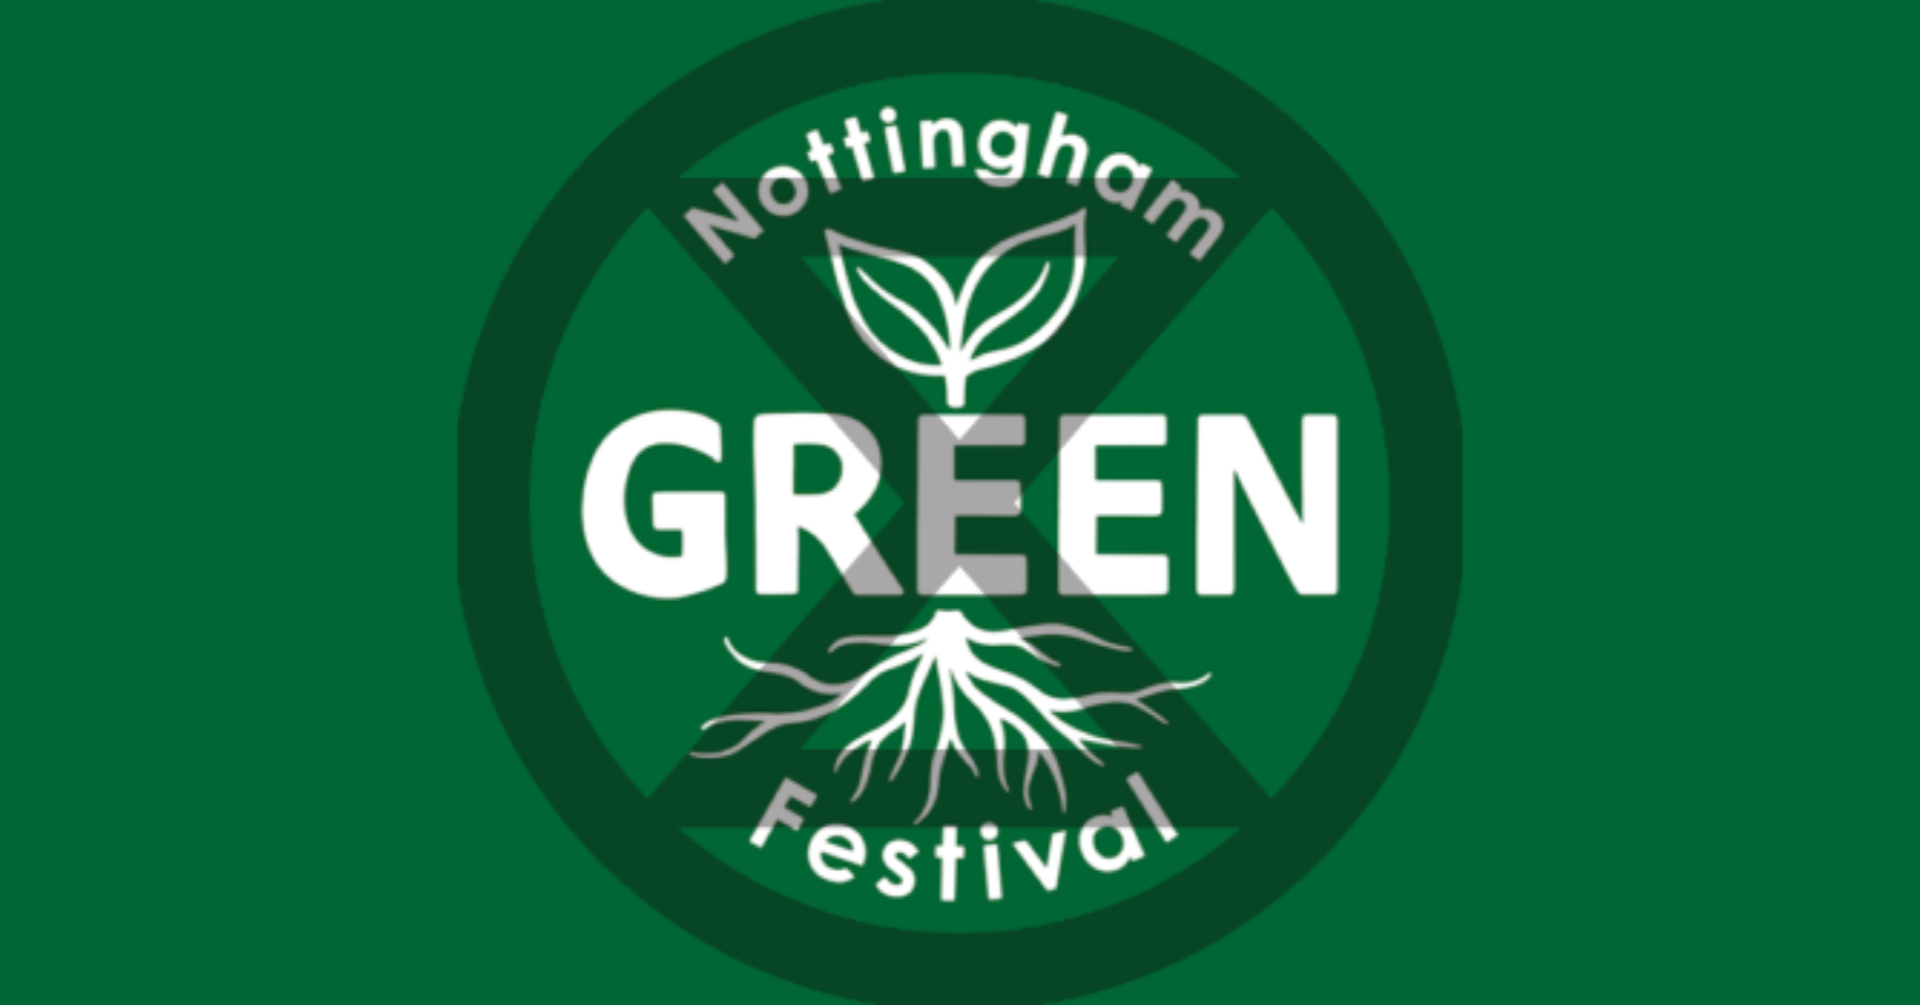 XR and Green Festival logos